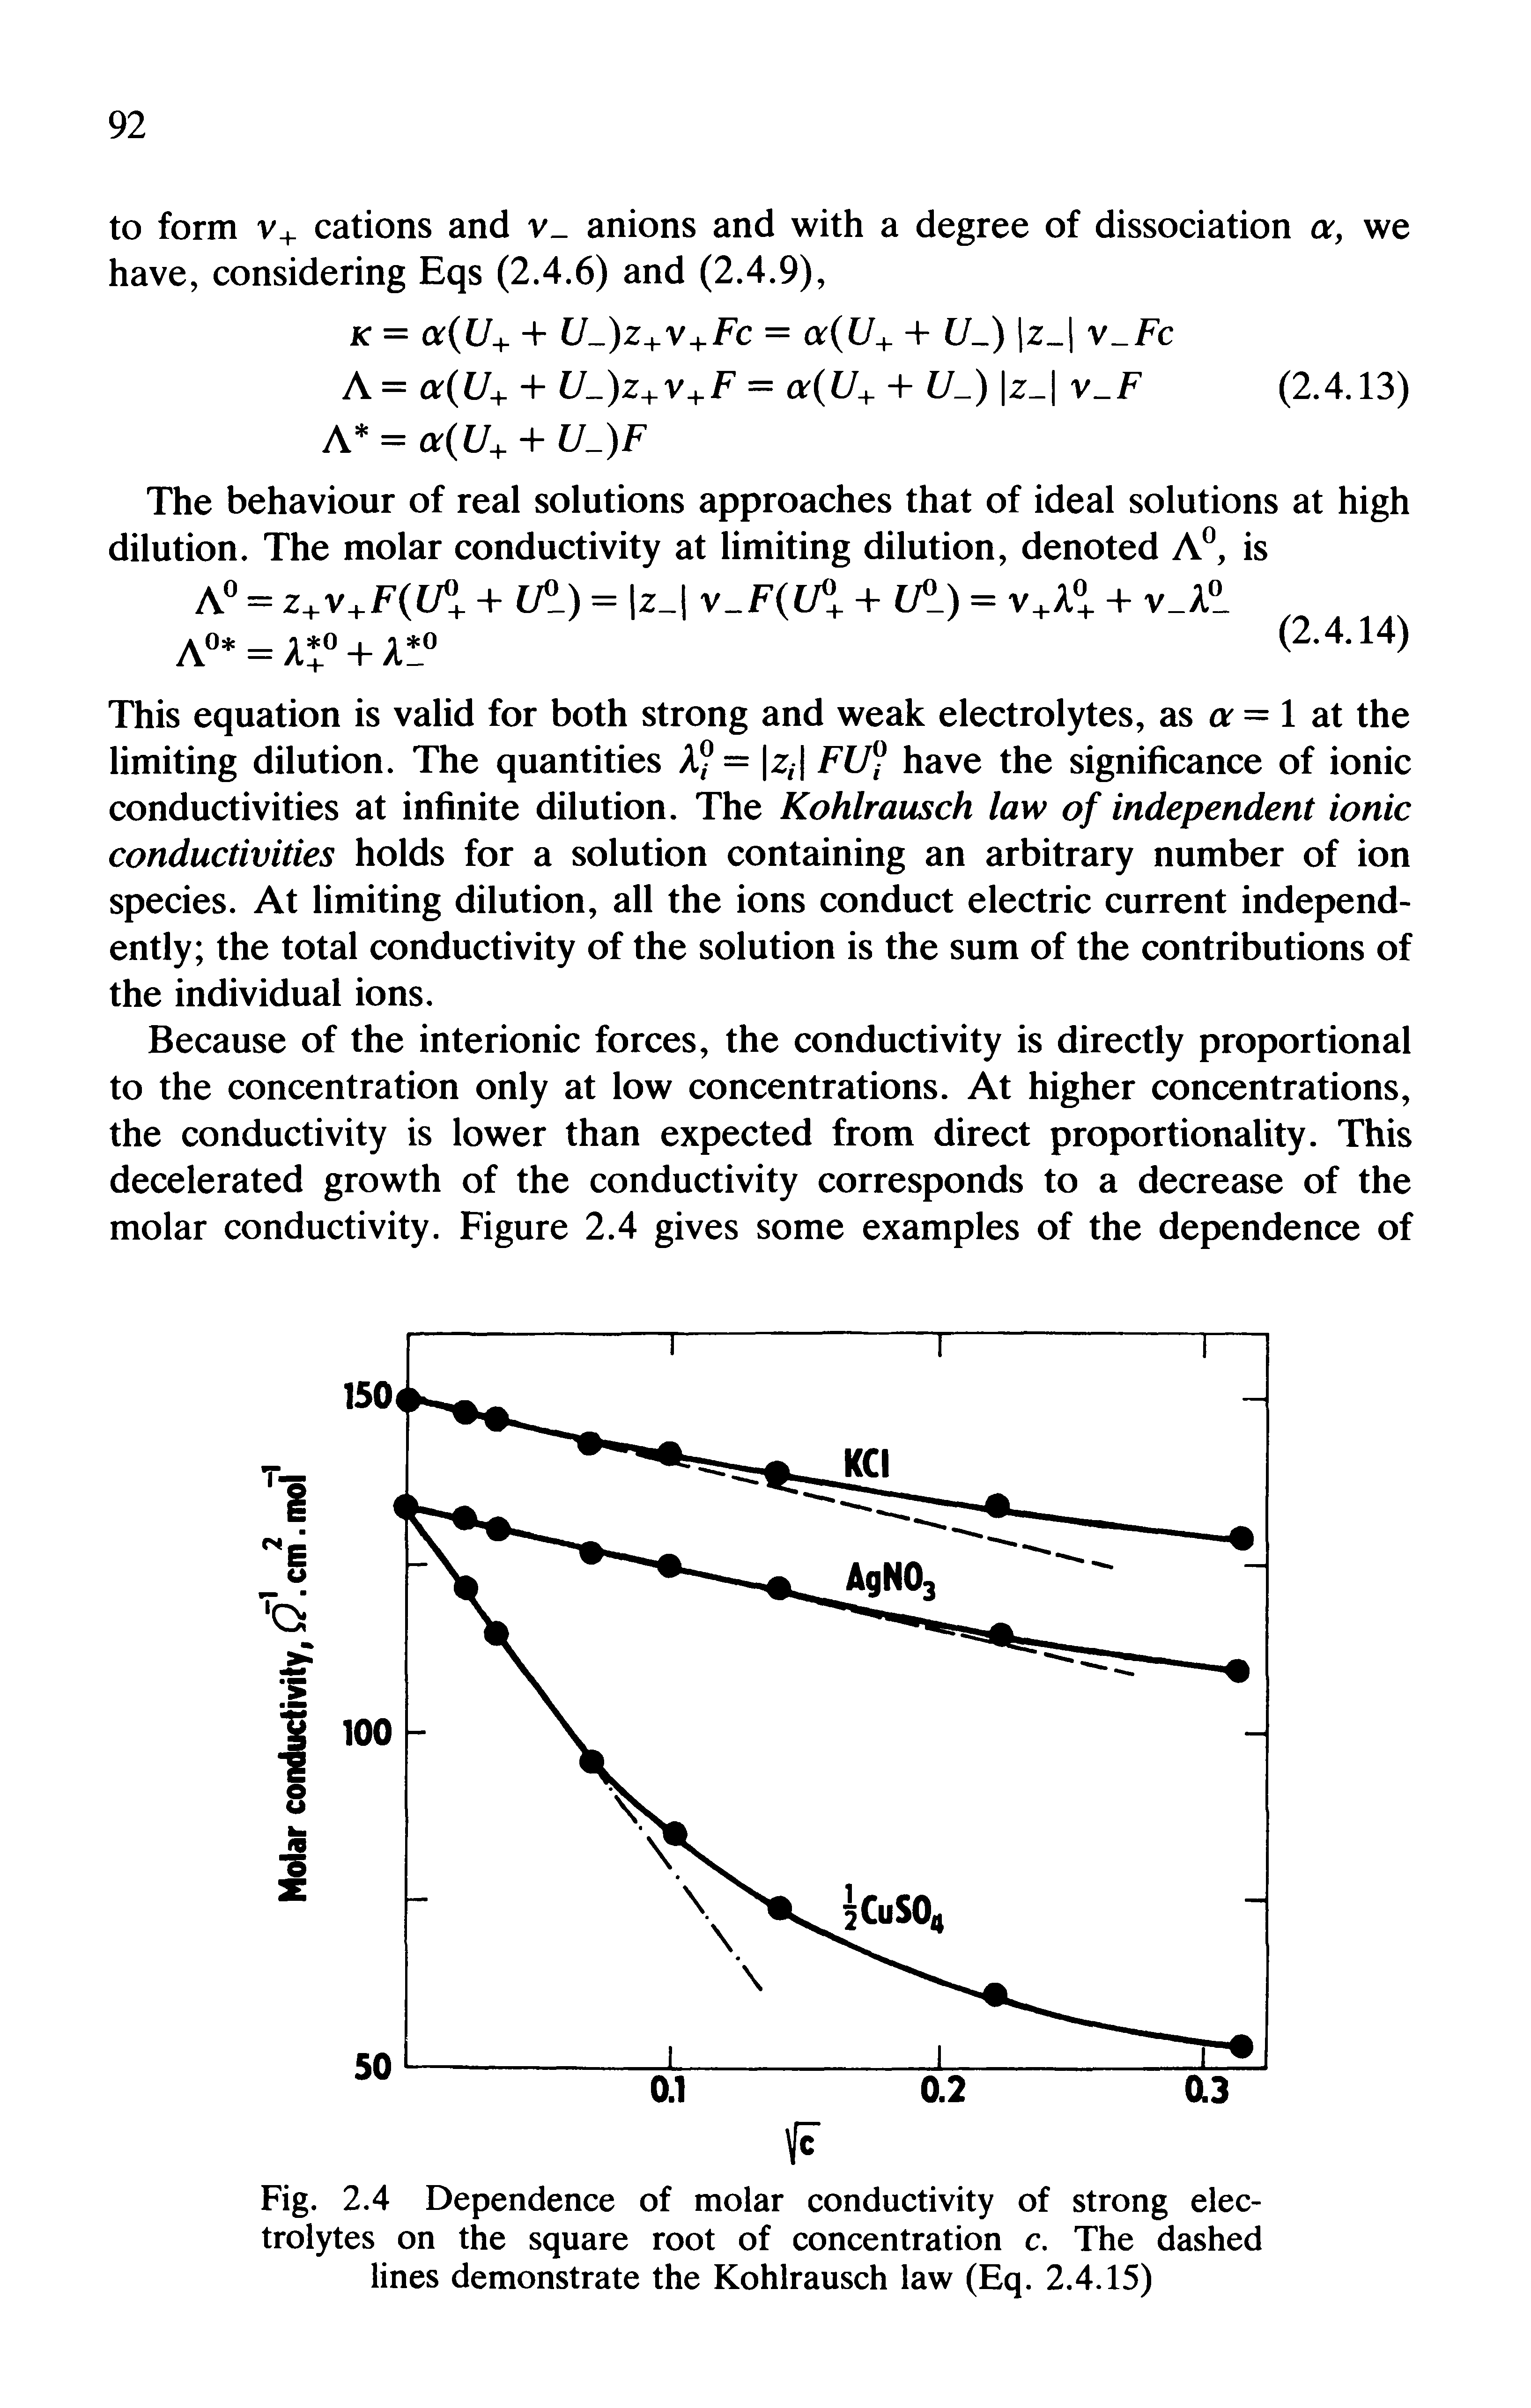 Fig. 2.4 Dependence of molar conductivity of strong electrolytes on the square root of concentration c. The dashed lines demonstrate the Kohlrausch law (Eq. 2.4.15)...